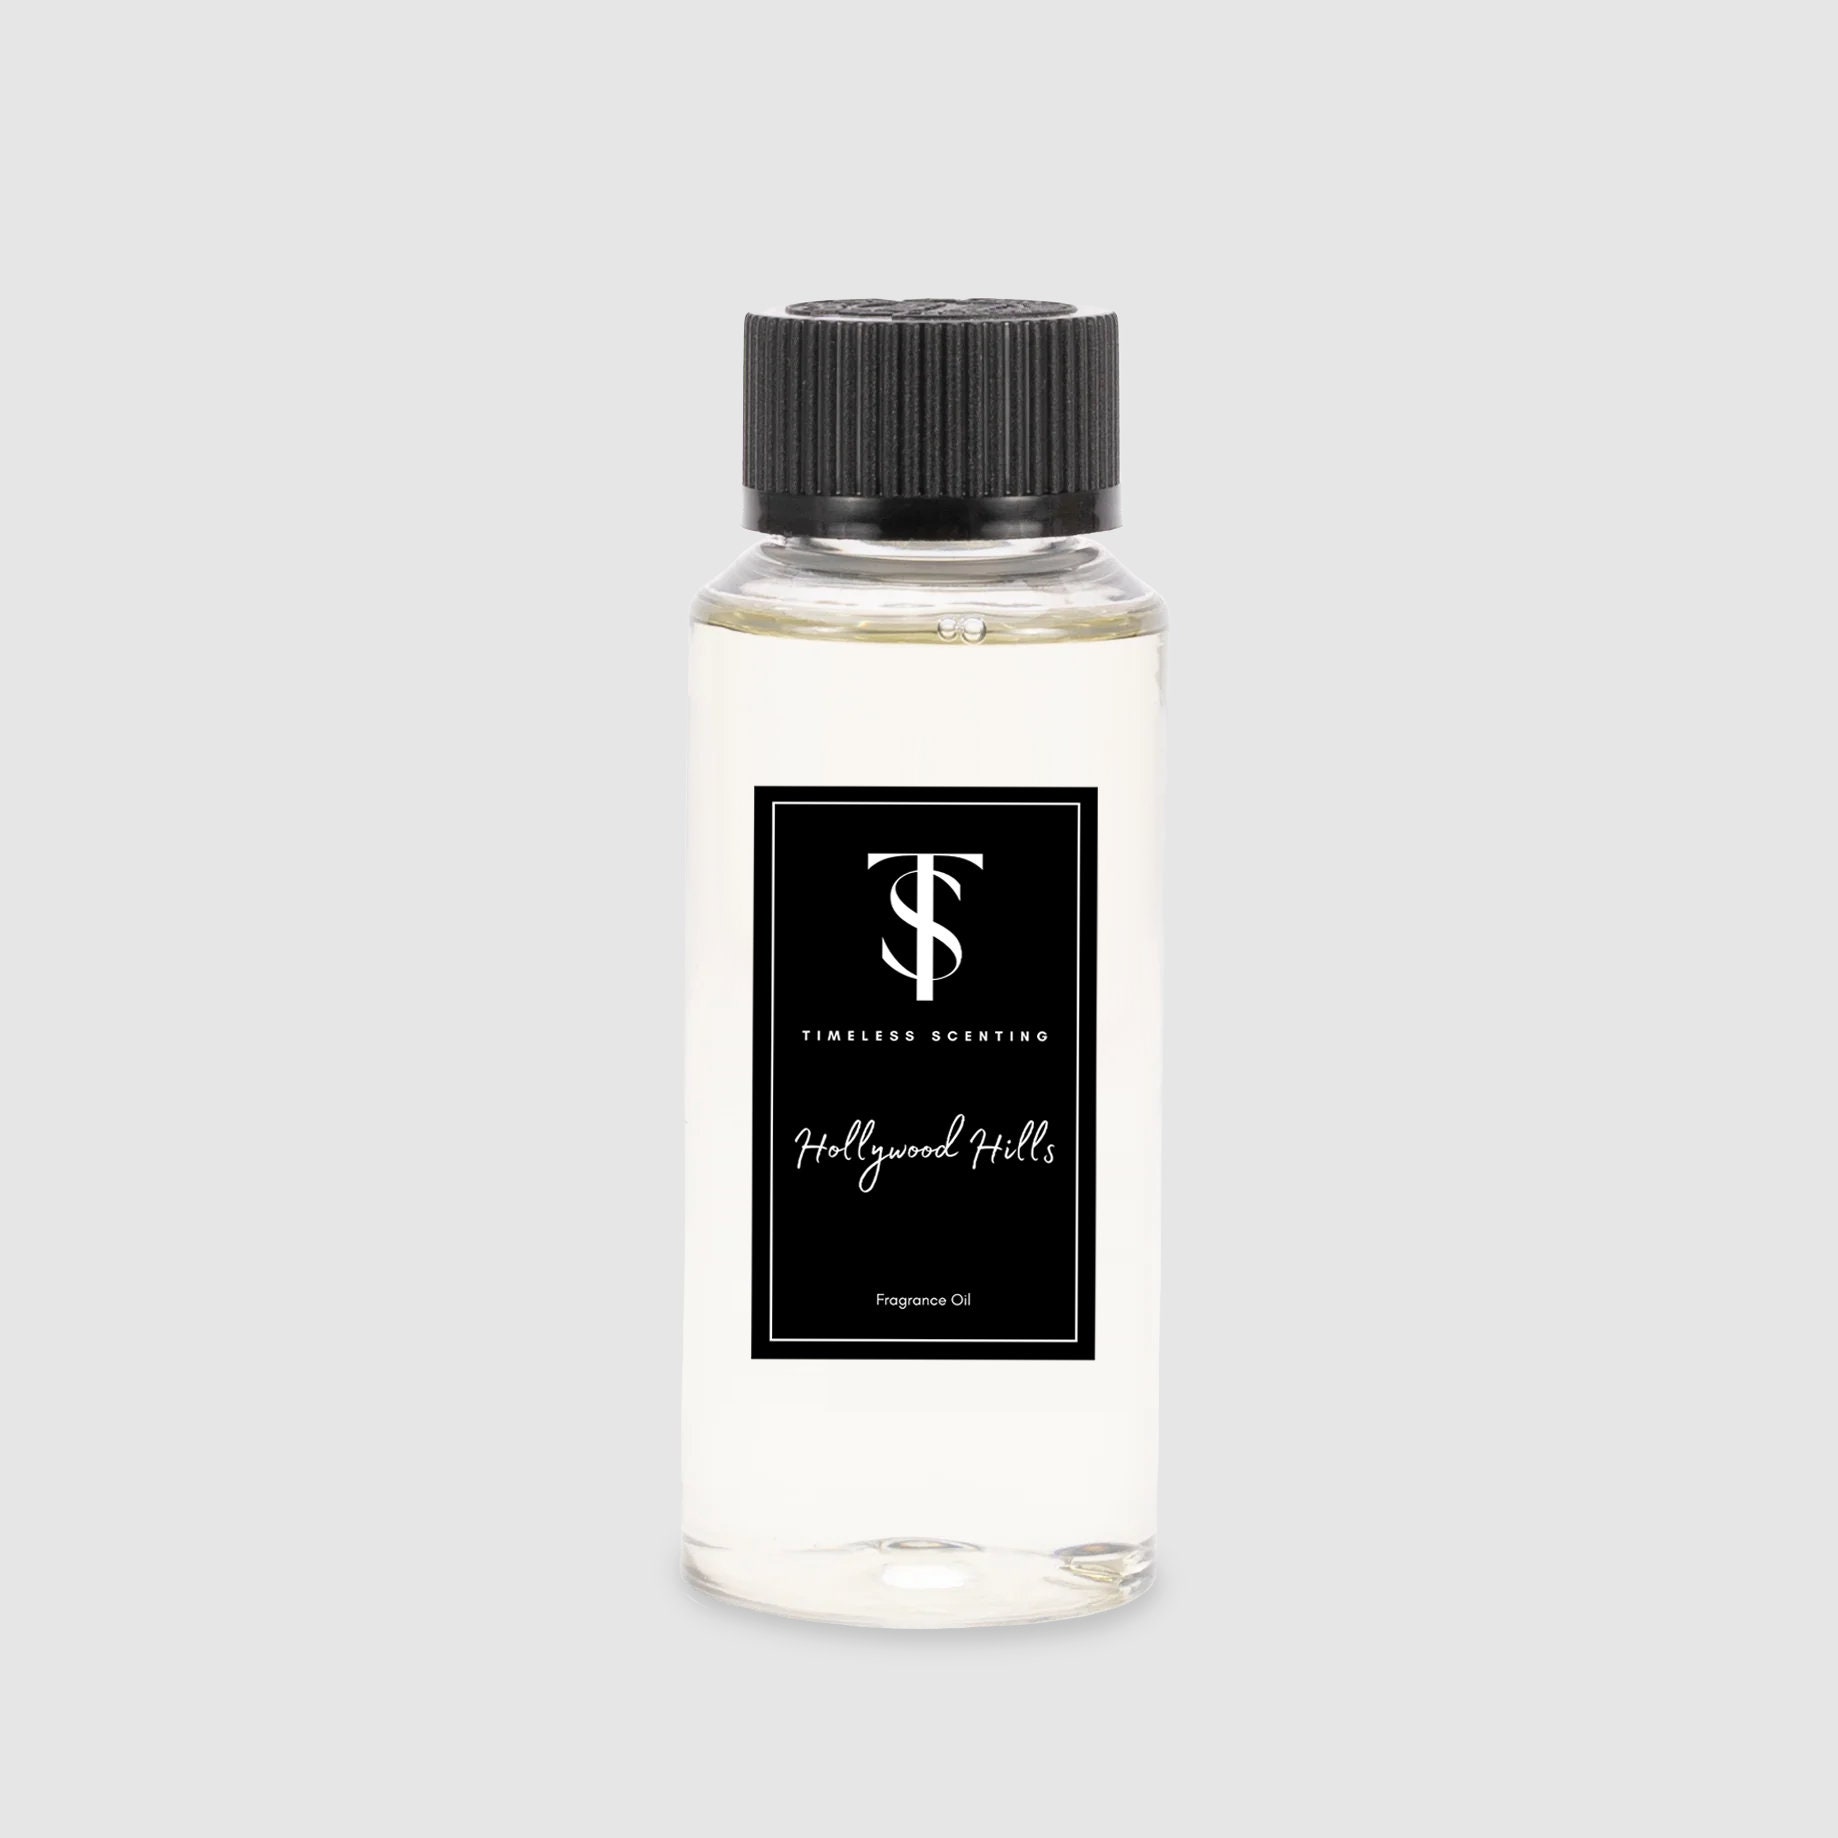 P&j Trading Fragrance Oil | Surf & Sand Set of 6 - Scented Oil for Soap Making, Diffusers, Candle Making, Lotions, Haircare, Slime, and Home Fragrance